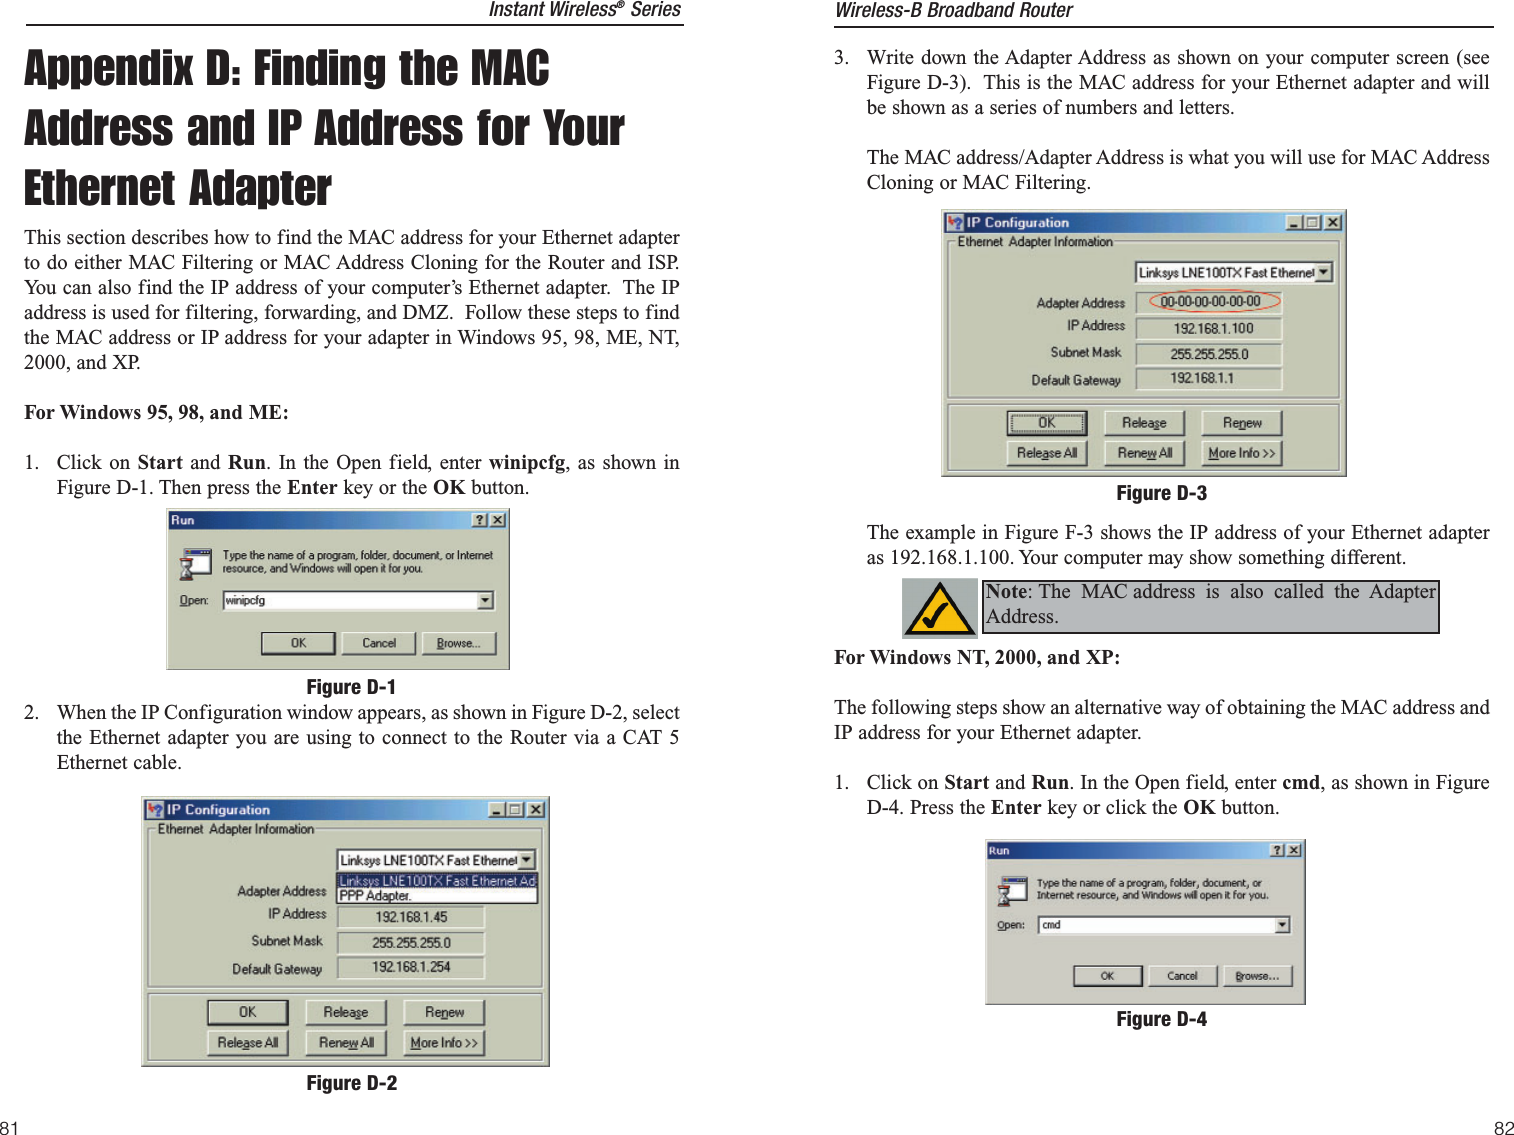 3.  Write down the Adapter Address as shown on your computer screen (seeFigure D-3).  This is the MAC address for your Ethernet adapter and willbe shown as a series of numbers and letters.  The MAC address/Adapter Address is what you will use for MAC AddressCloning or MAC Filtering. The example in Figure F-3 shows the IP address of your Ethernet adapteras 192.168.1.100. Your computer may show something different.  For Windows NT, 2000, and XP:The following steps show an alternative way of obtaining the MAC address andIP address for your Ethernet adapter.1. Click on Start and Run. In the Open field, enter cmd, as shown in FigureD-4. Press the Enter key or click the OK button.Figure D-3Figure D-4Note: The MAC address is also called the AdapterAddress.Instant Wireless®SeriesAppendix D: Finding the MACAddress and IP Address for YourEthernet AdapterThis section describes how to find the MAC address for your Ethernet adapterto do either MAC Filtering or MAC Address Cloning for the Router and ISP.You can also find the IP address of your computer’s Ethernet adapter.  The IPaddress is used for filtering, forwarding, and DMZ.  Follow these steps to findthe MAC address or IP address for your adapter in Windows 95, 98, ME, NT,2000, and XP. For Windows 95, 98, and ME:1. Click on Start and  Run. In the Open field, enter winipcfg, as shown inFigure D-1. Then press the Enter key or the OK button.2.  When the IP Configuration window appears, as shown in Figure D-2, selectthe Ethernet adapter you are using to connect to the Router via a CAT 5Ethernet cable.Figure D-1Figure D-2Wireless-B Broadband Router8281